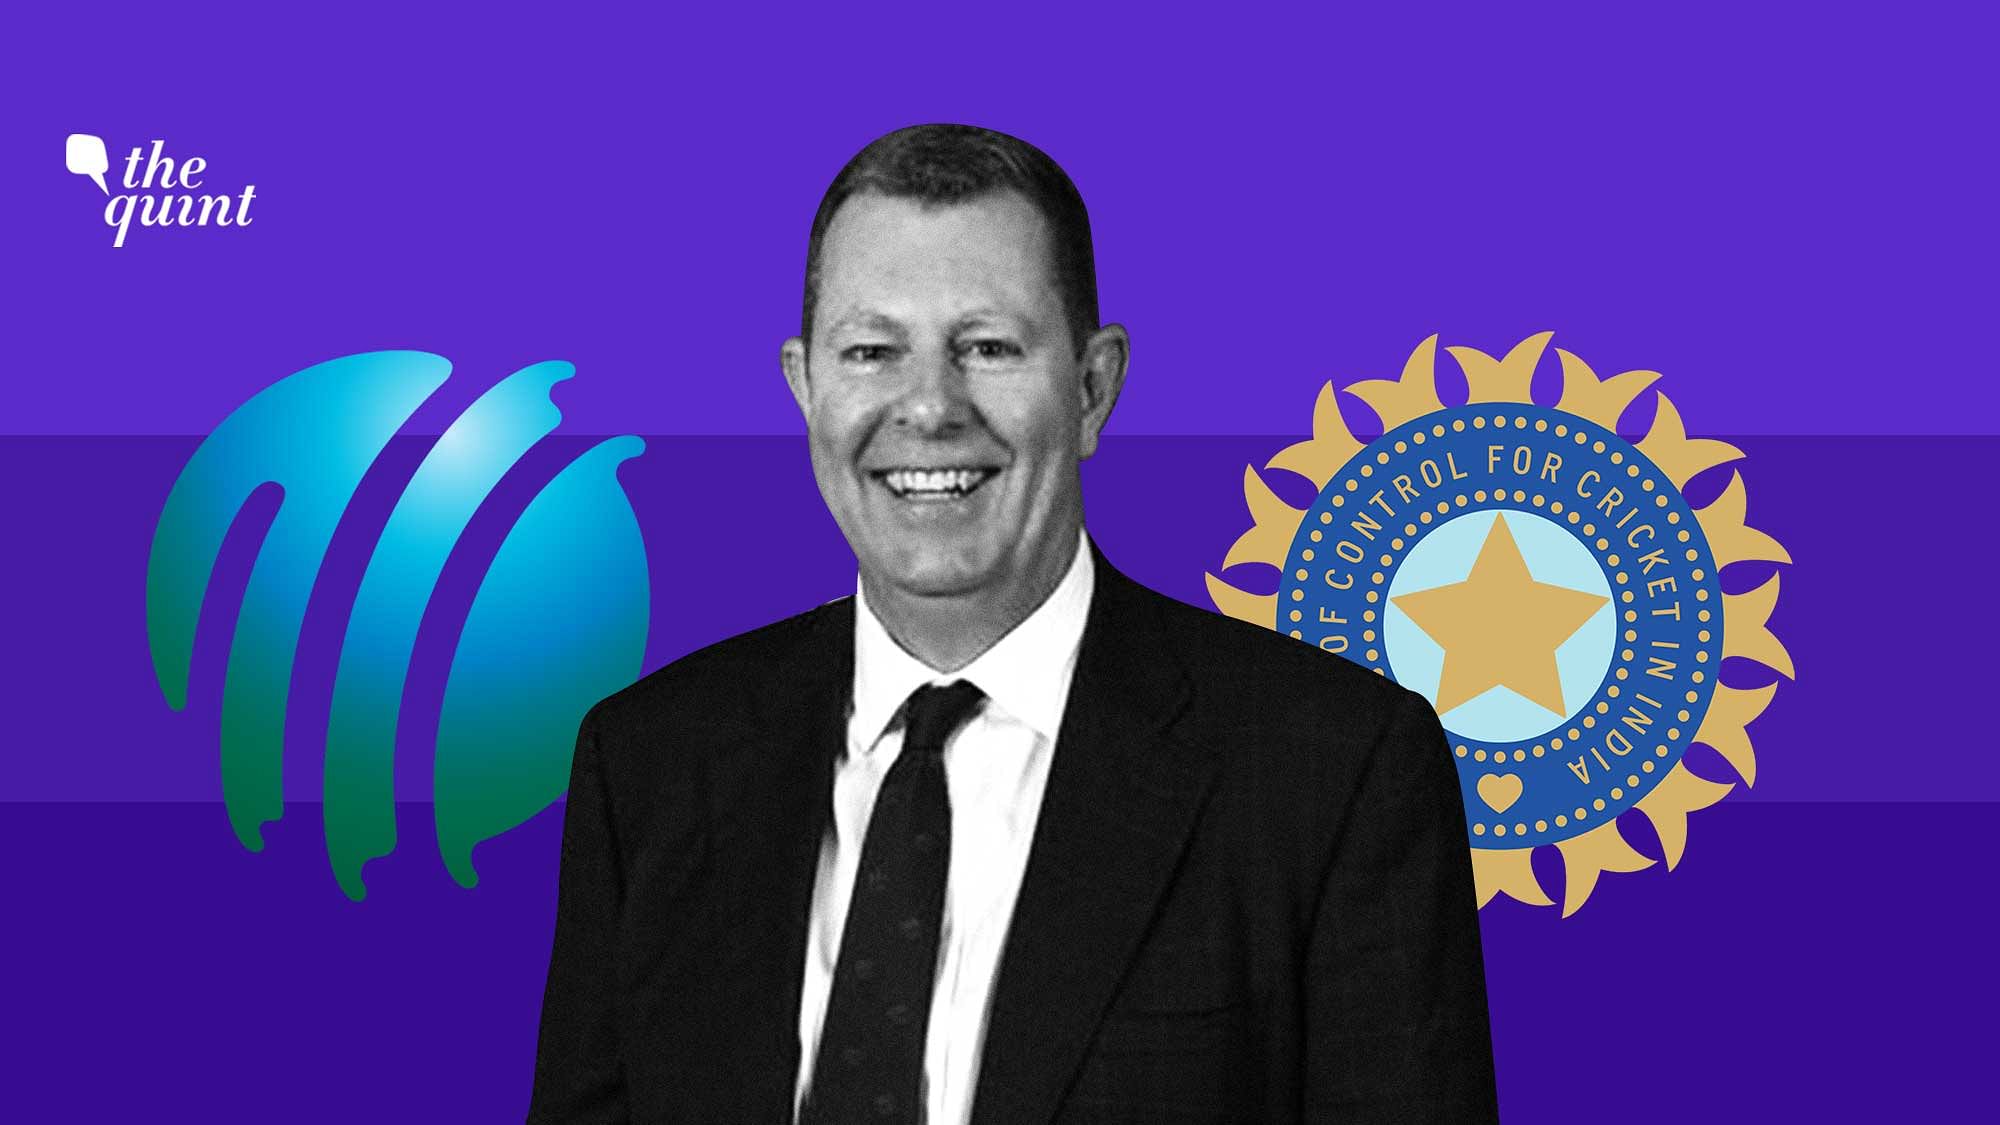 New ICC Chairman Greg Barclay and What His Election Means For BCCI